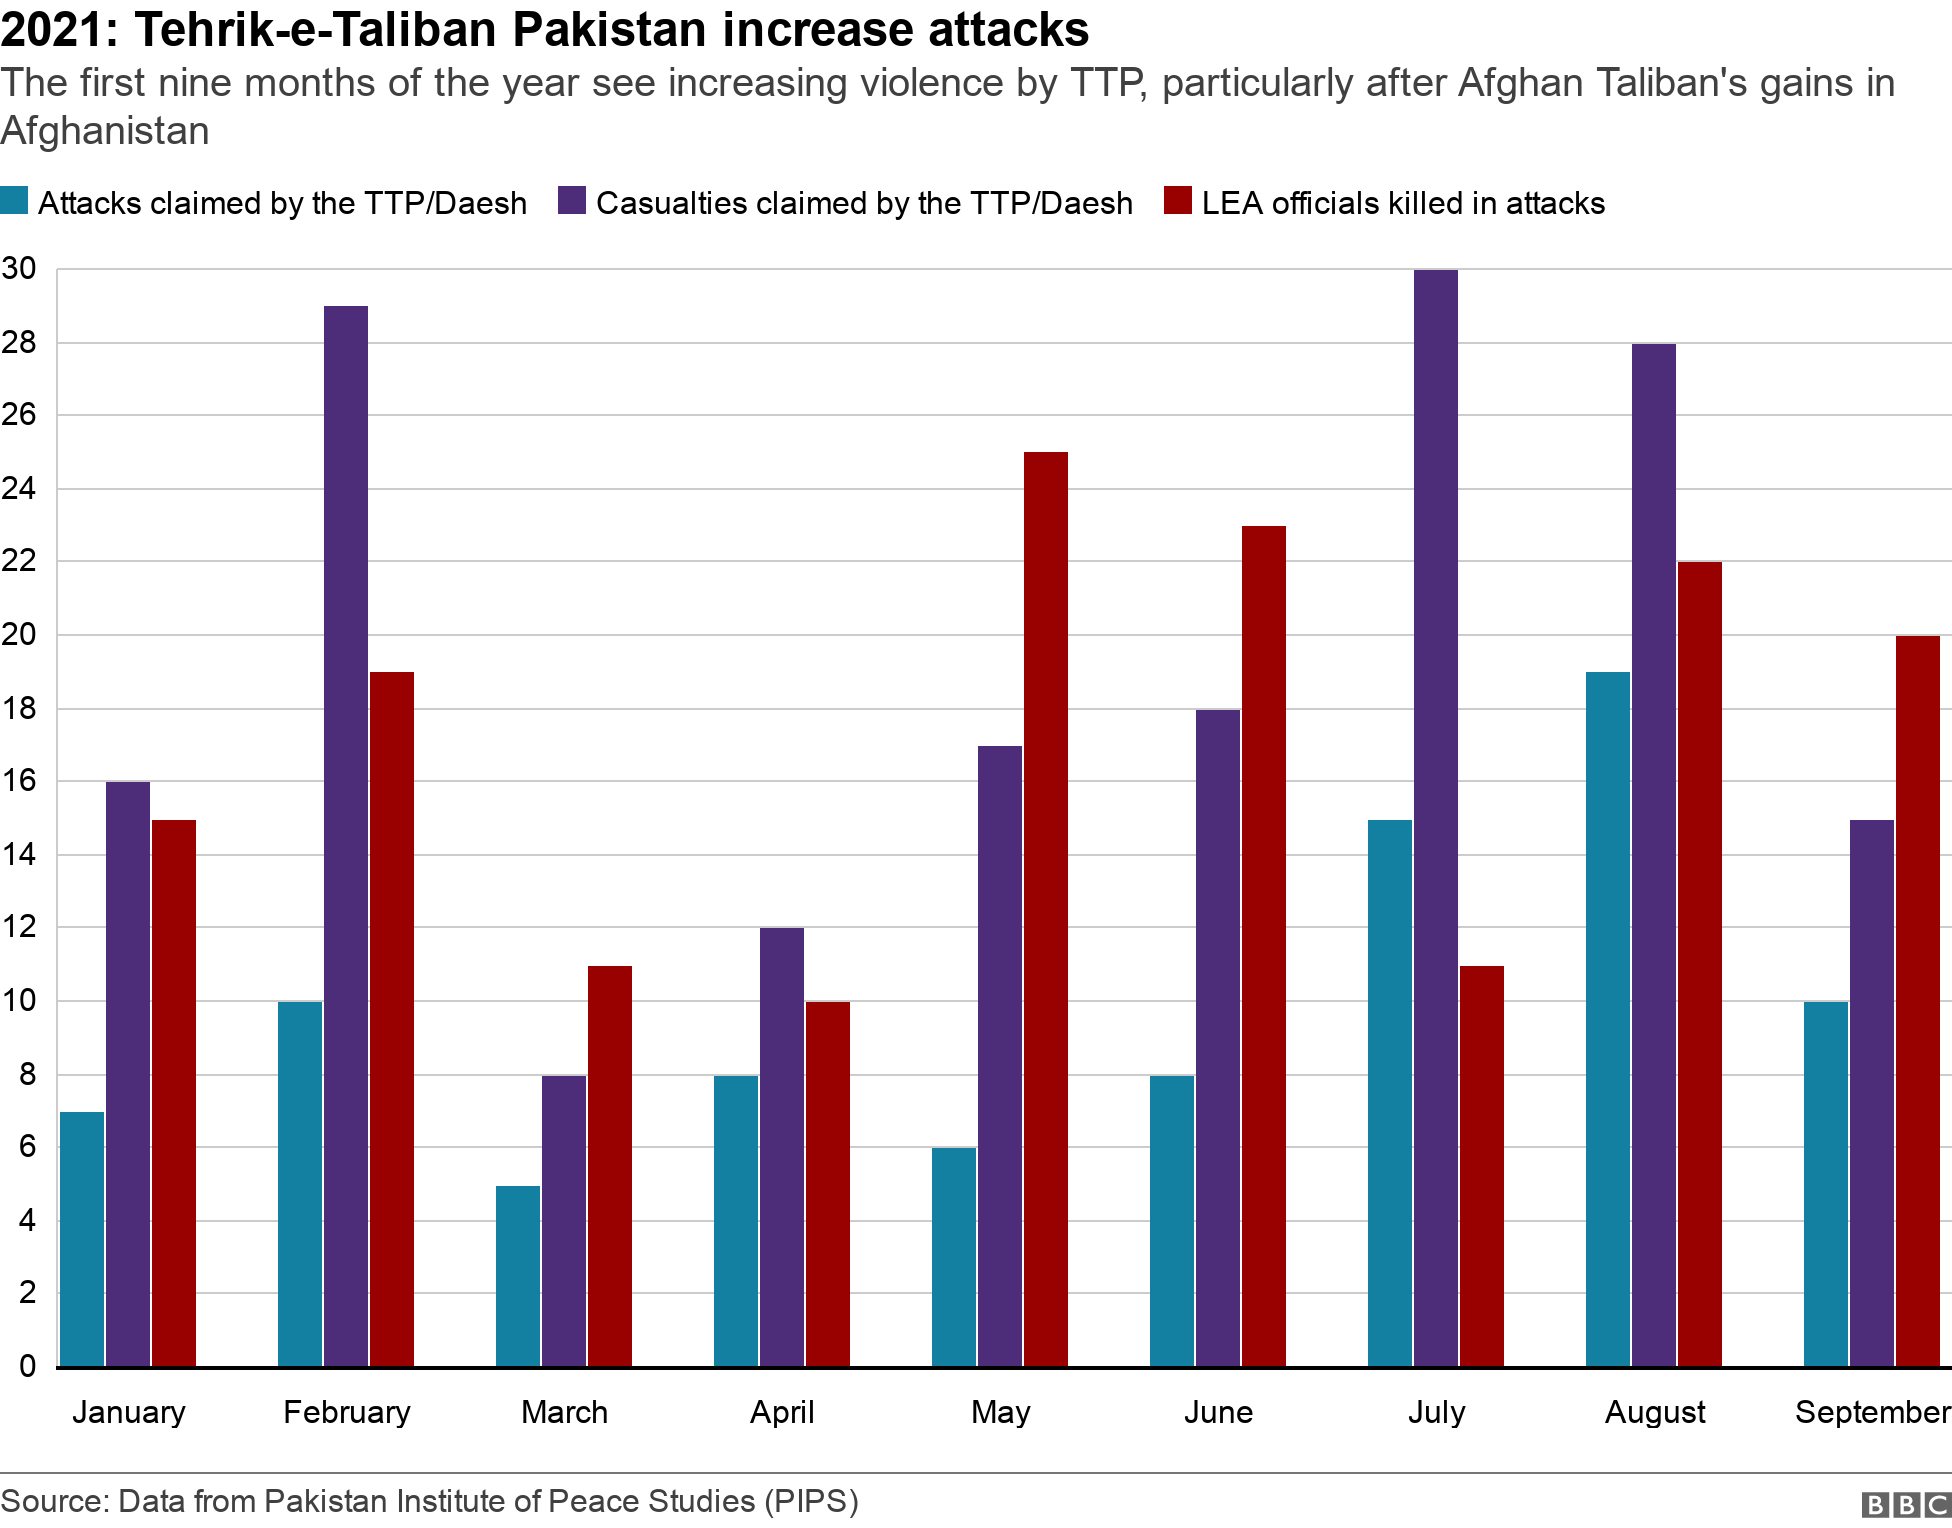 Graphic shows increase in TTP attacks